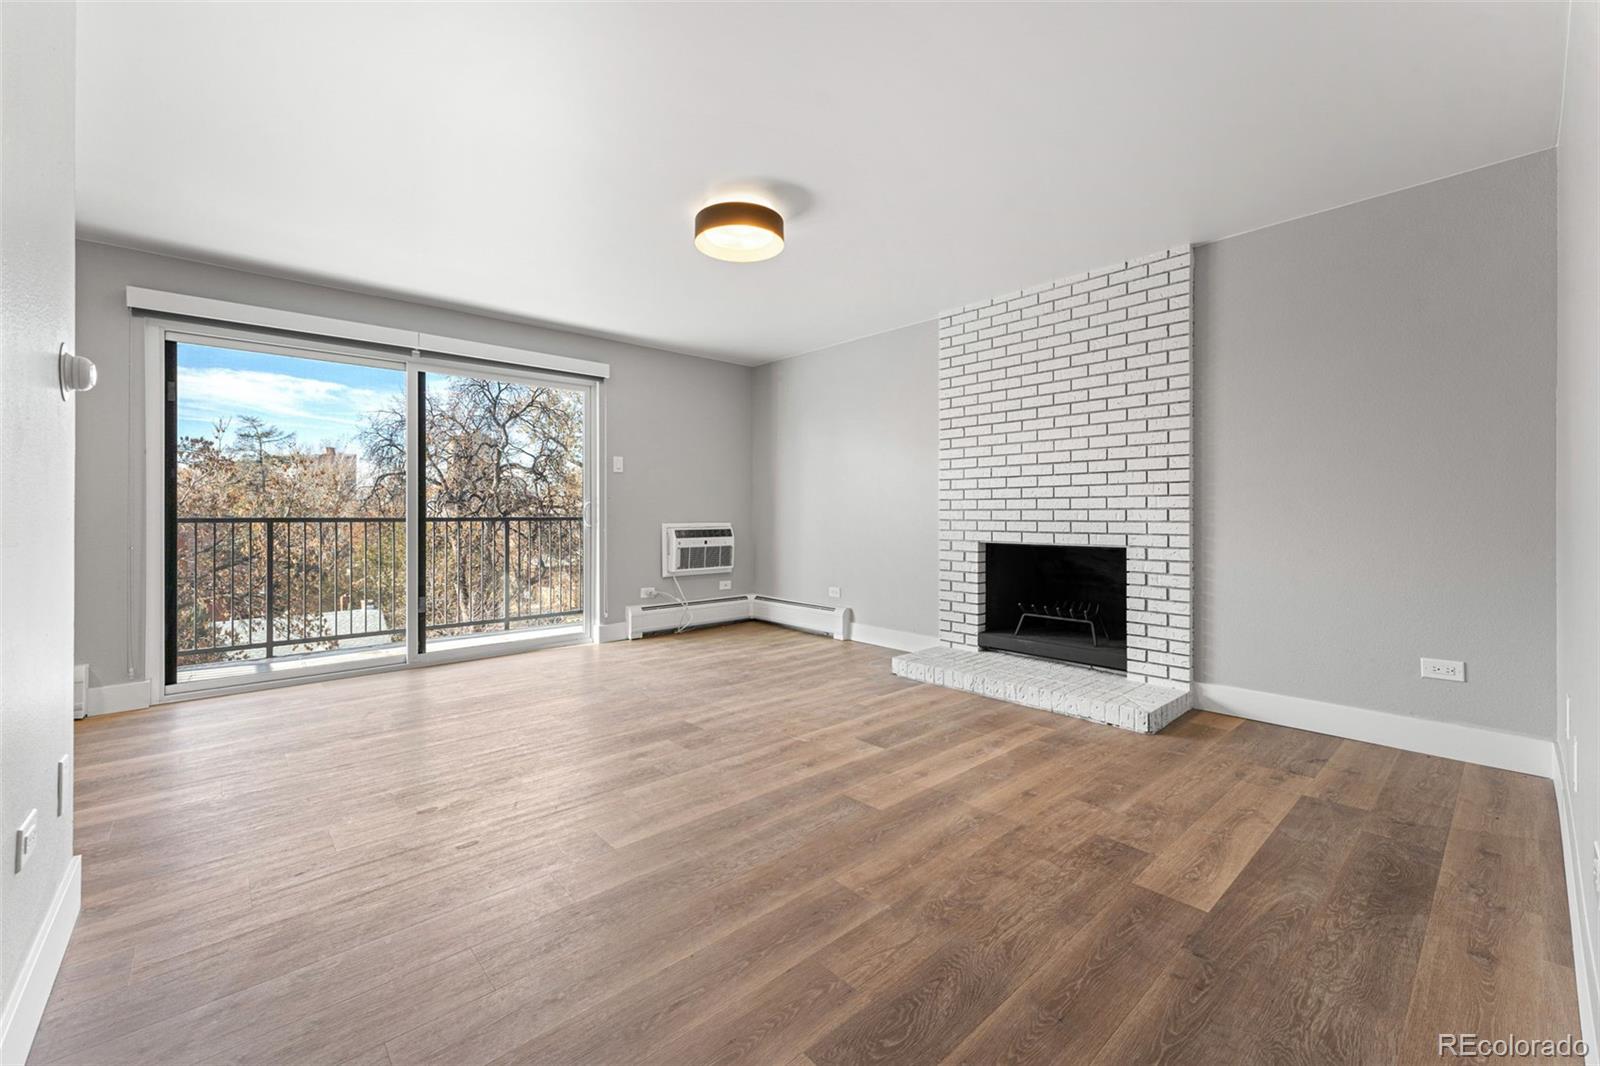 wooden floor fireplace and natural light in room